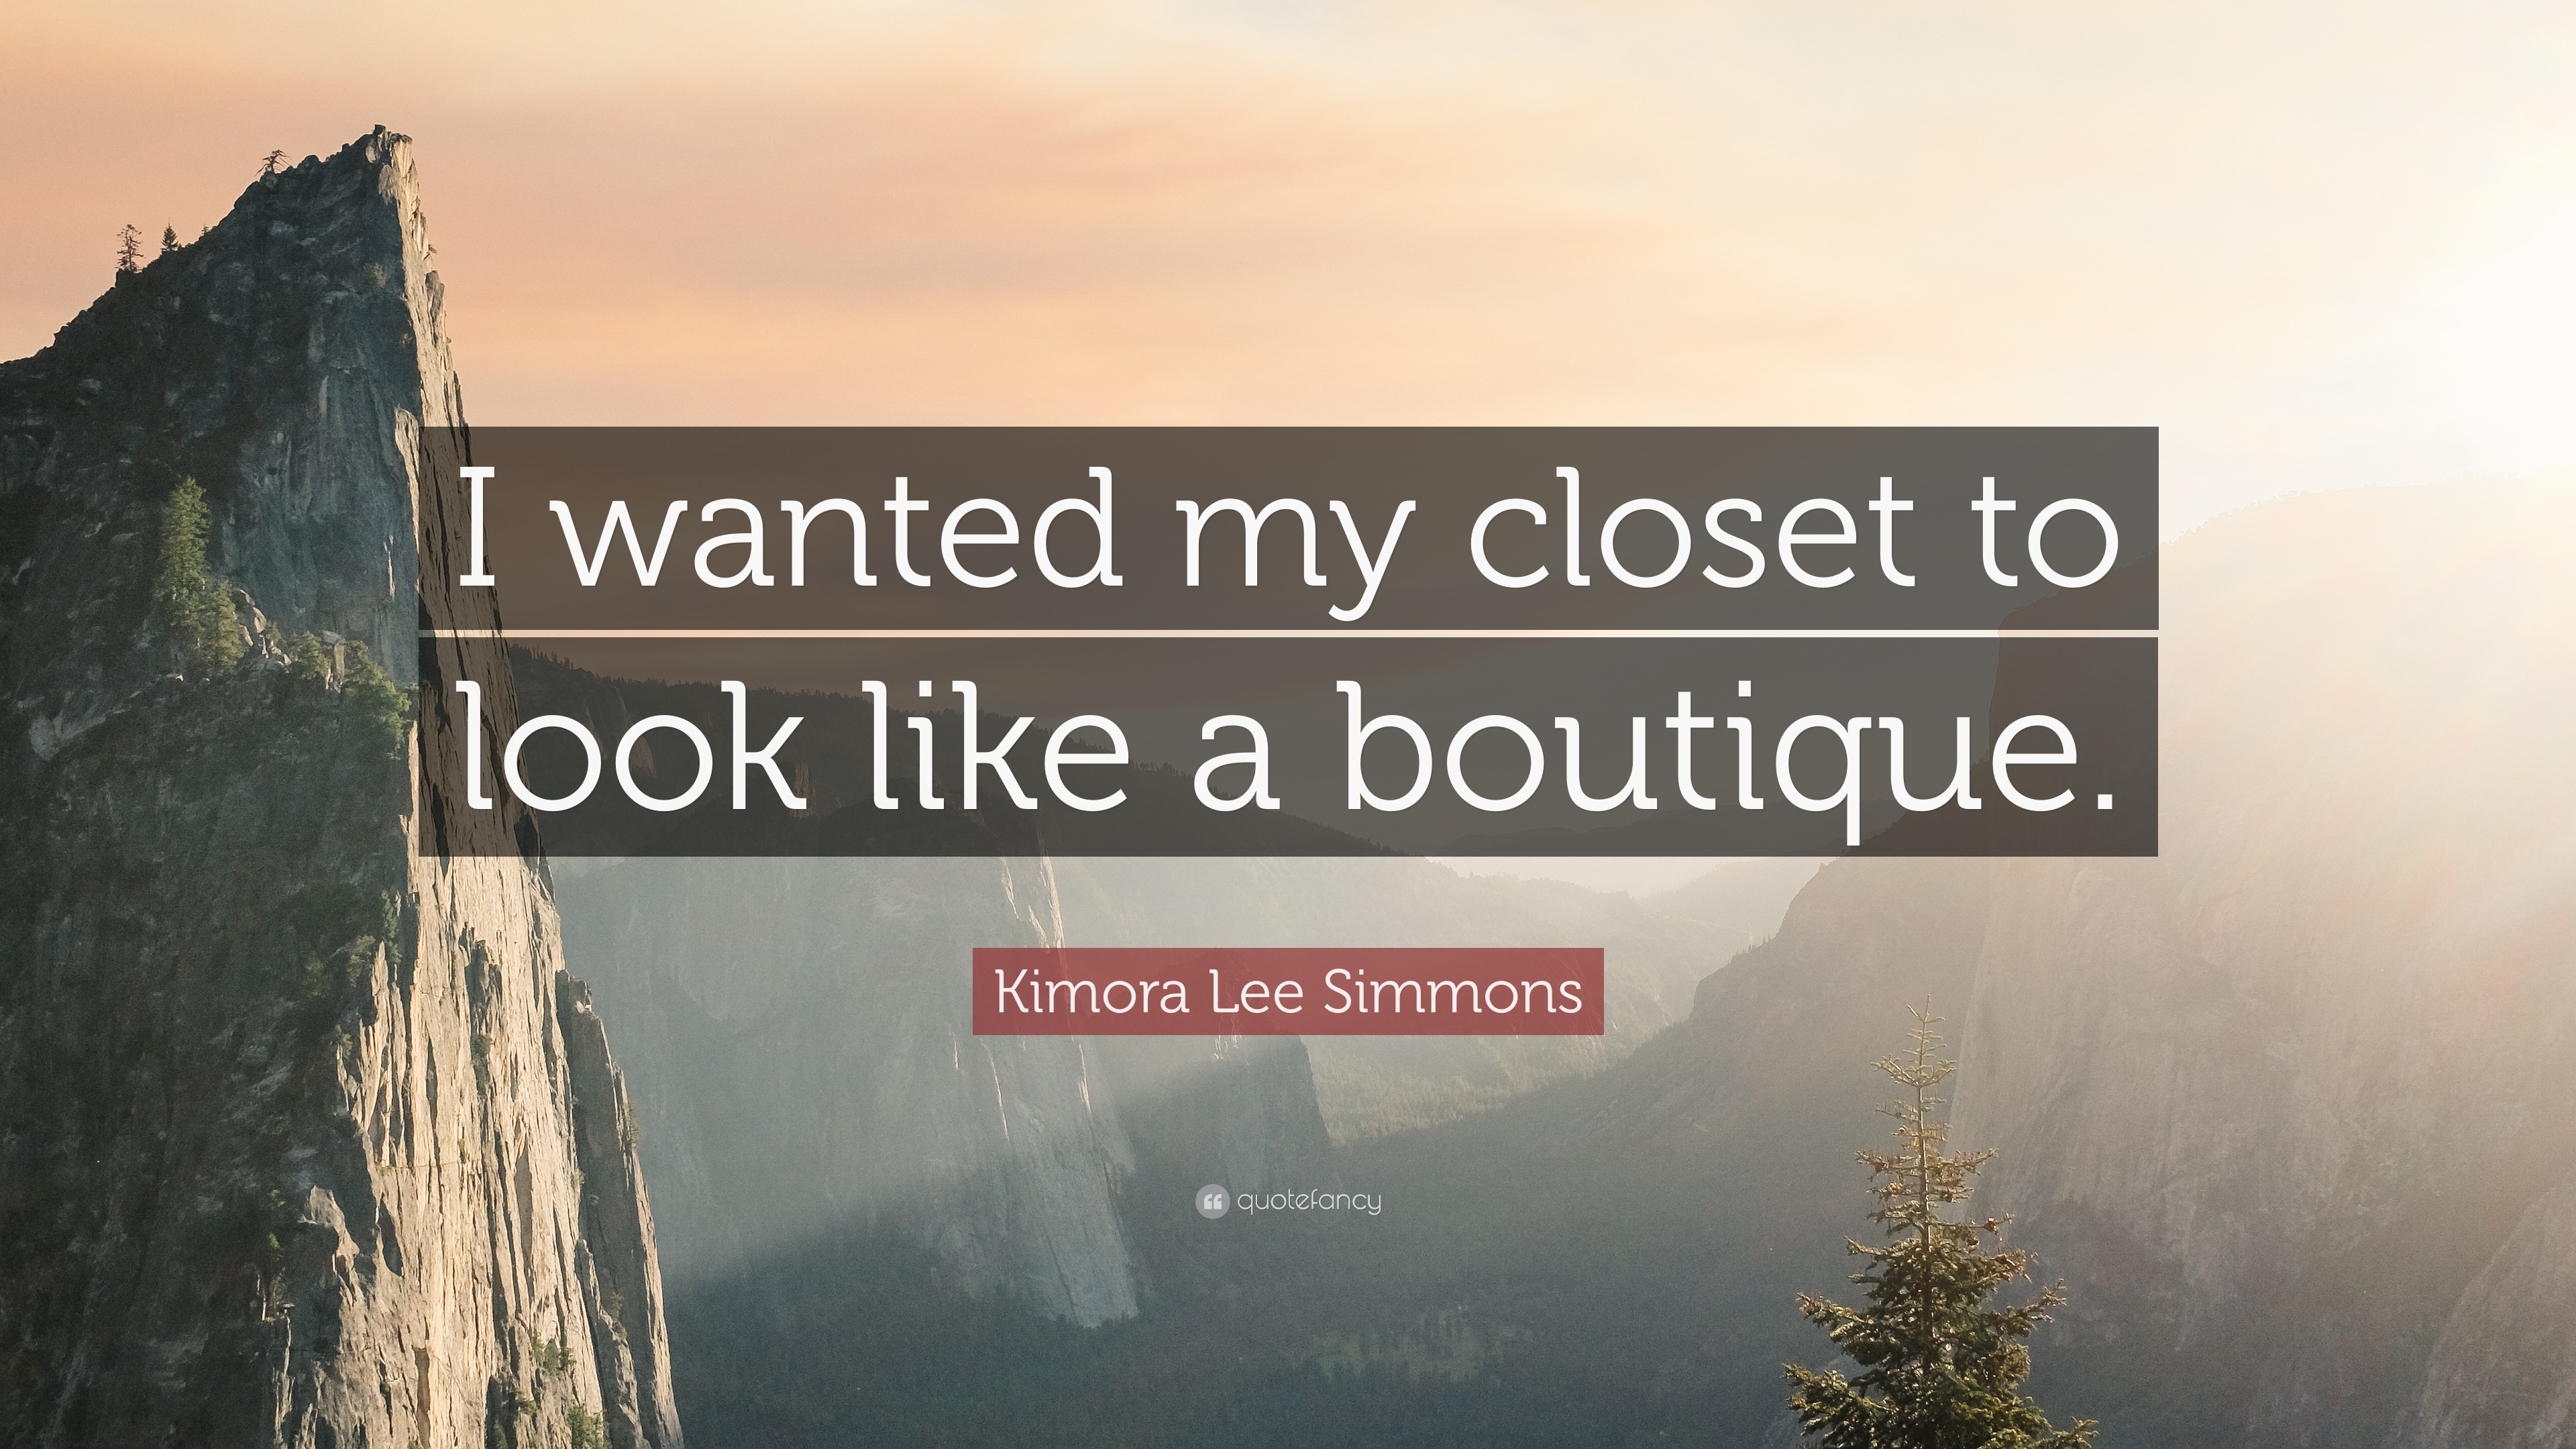 Kimora Lee Simmons Quote: “I wanted my closet to look like a